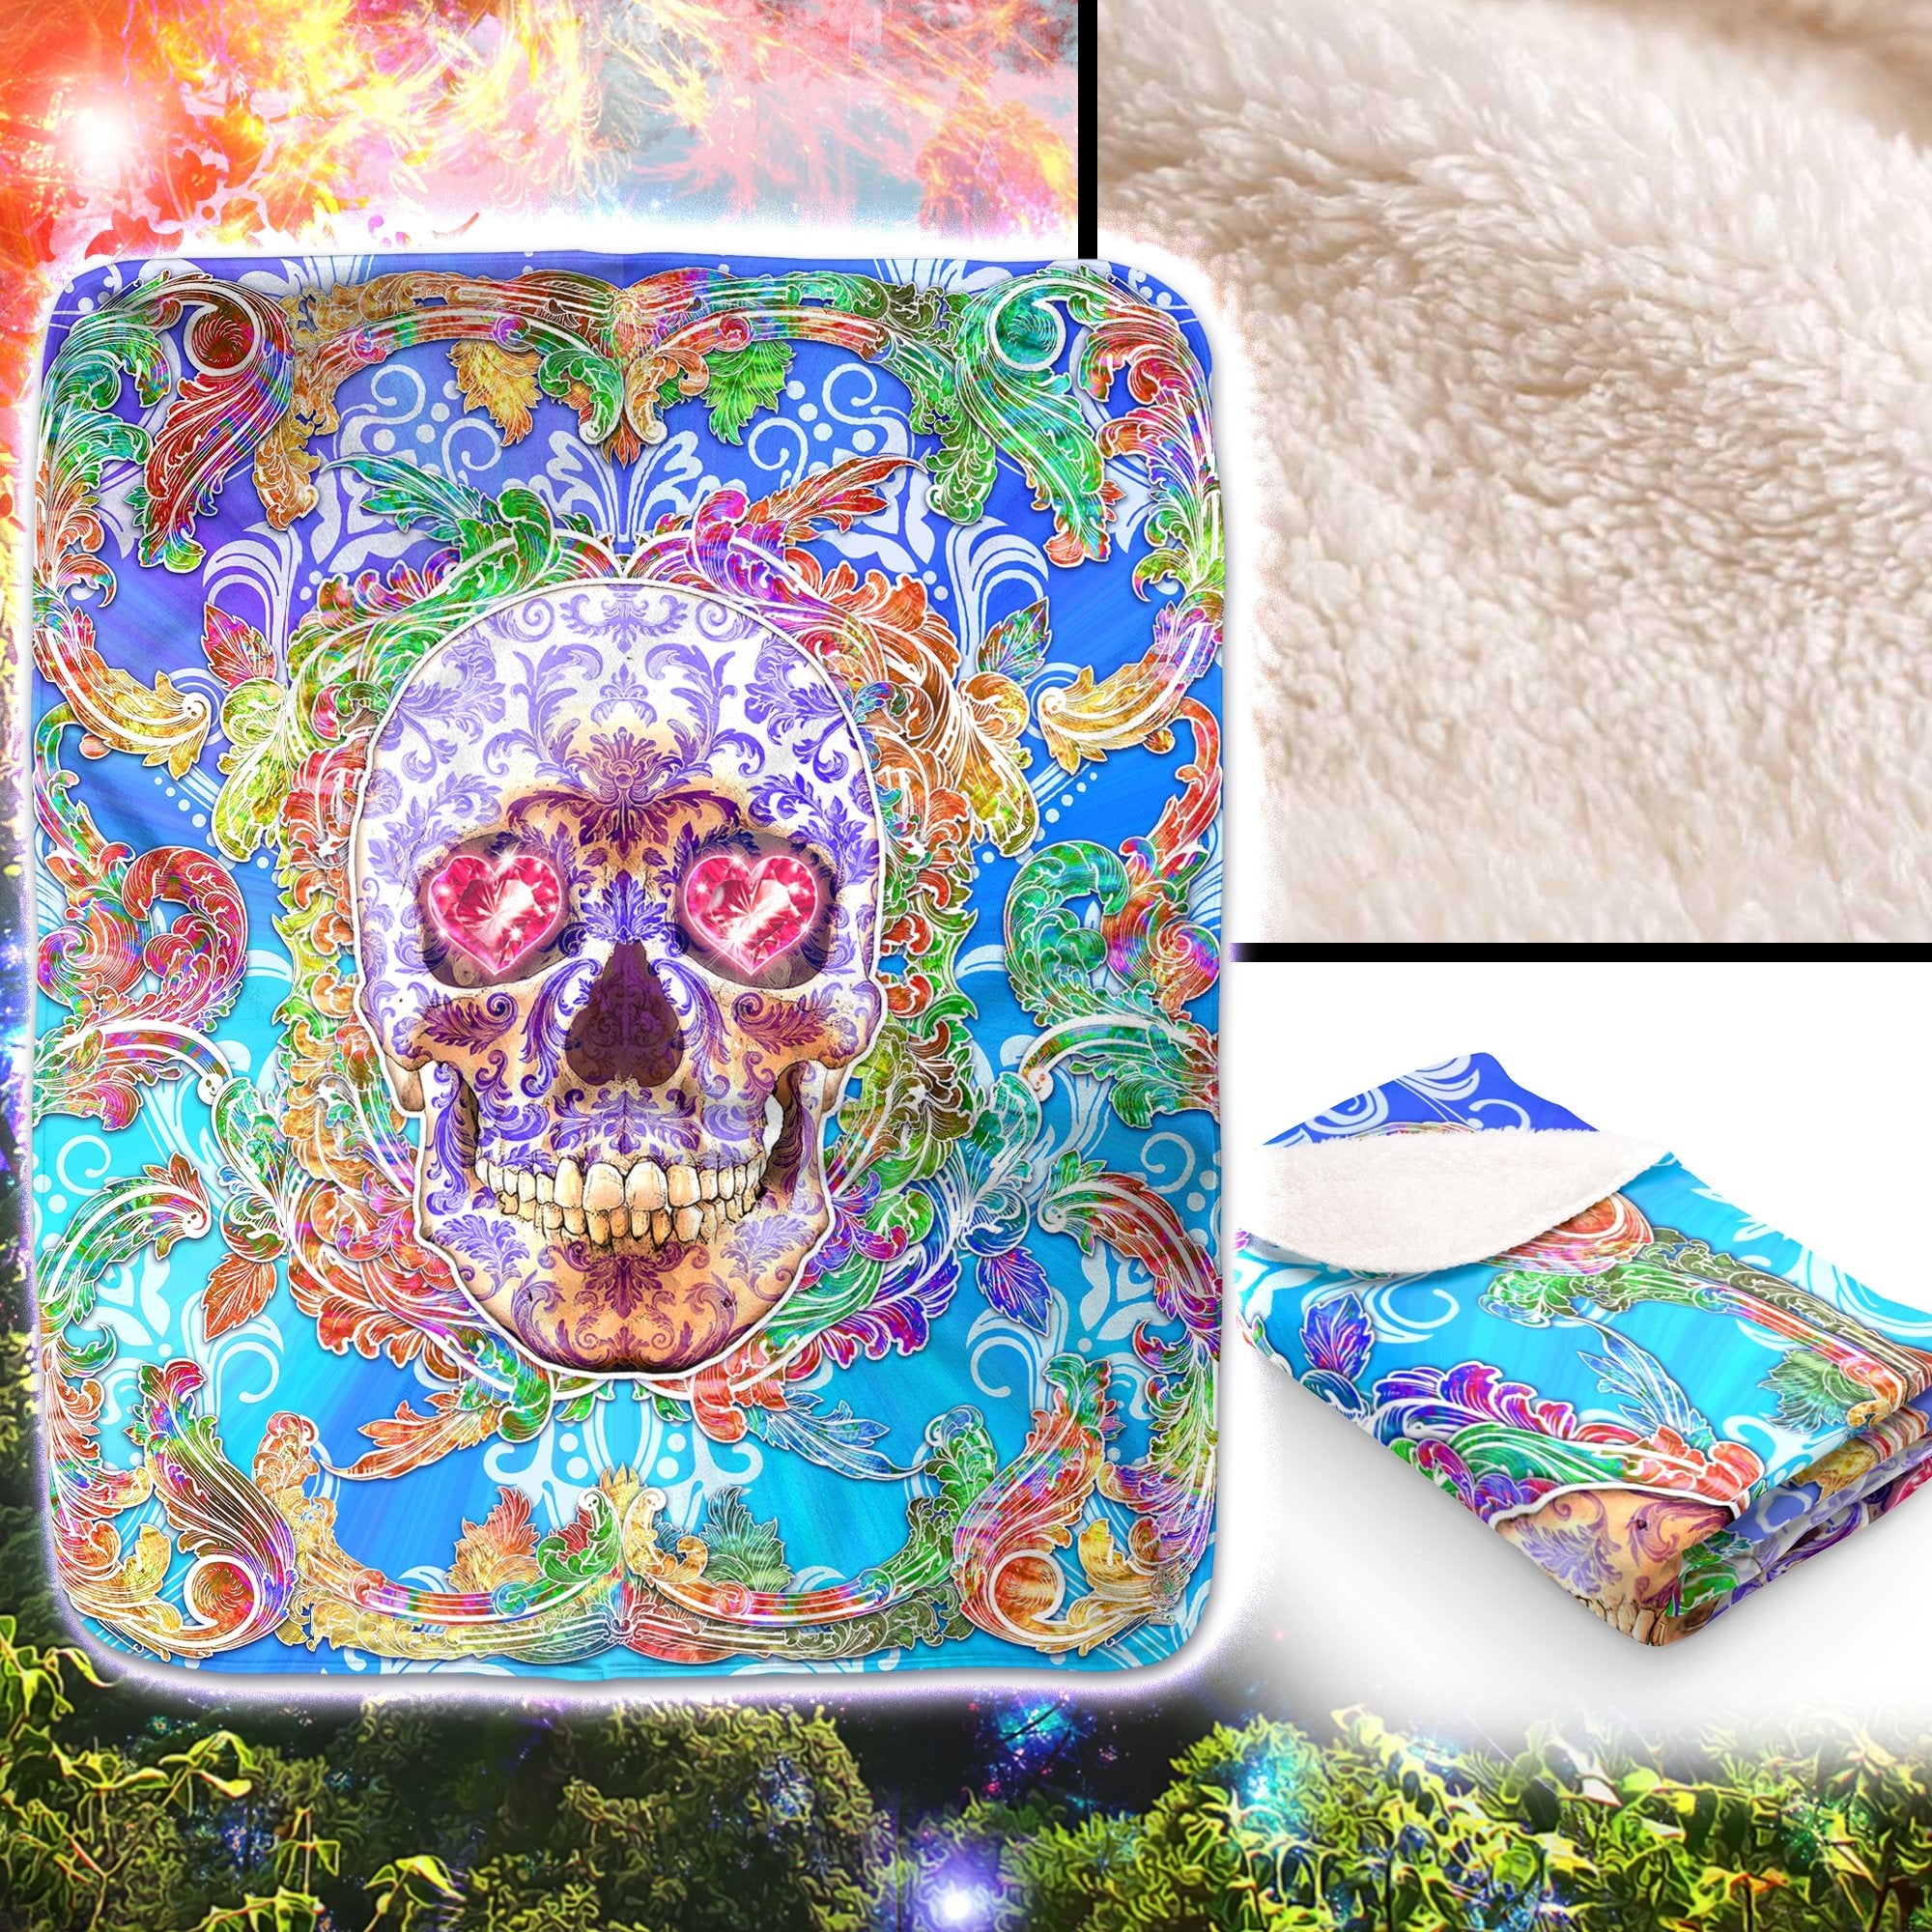 Sugar Skull Throw Fleece Blanket, Macabre Art, Ecclectic and Indie Home Decor, Eclectic and Funky Gift - Psy Purple - Abysm Internal